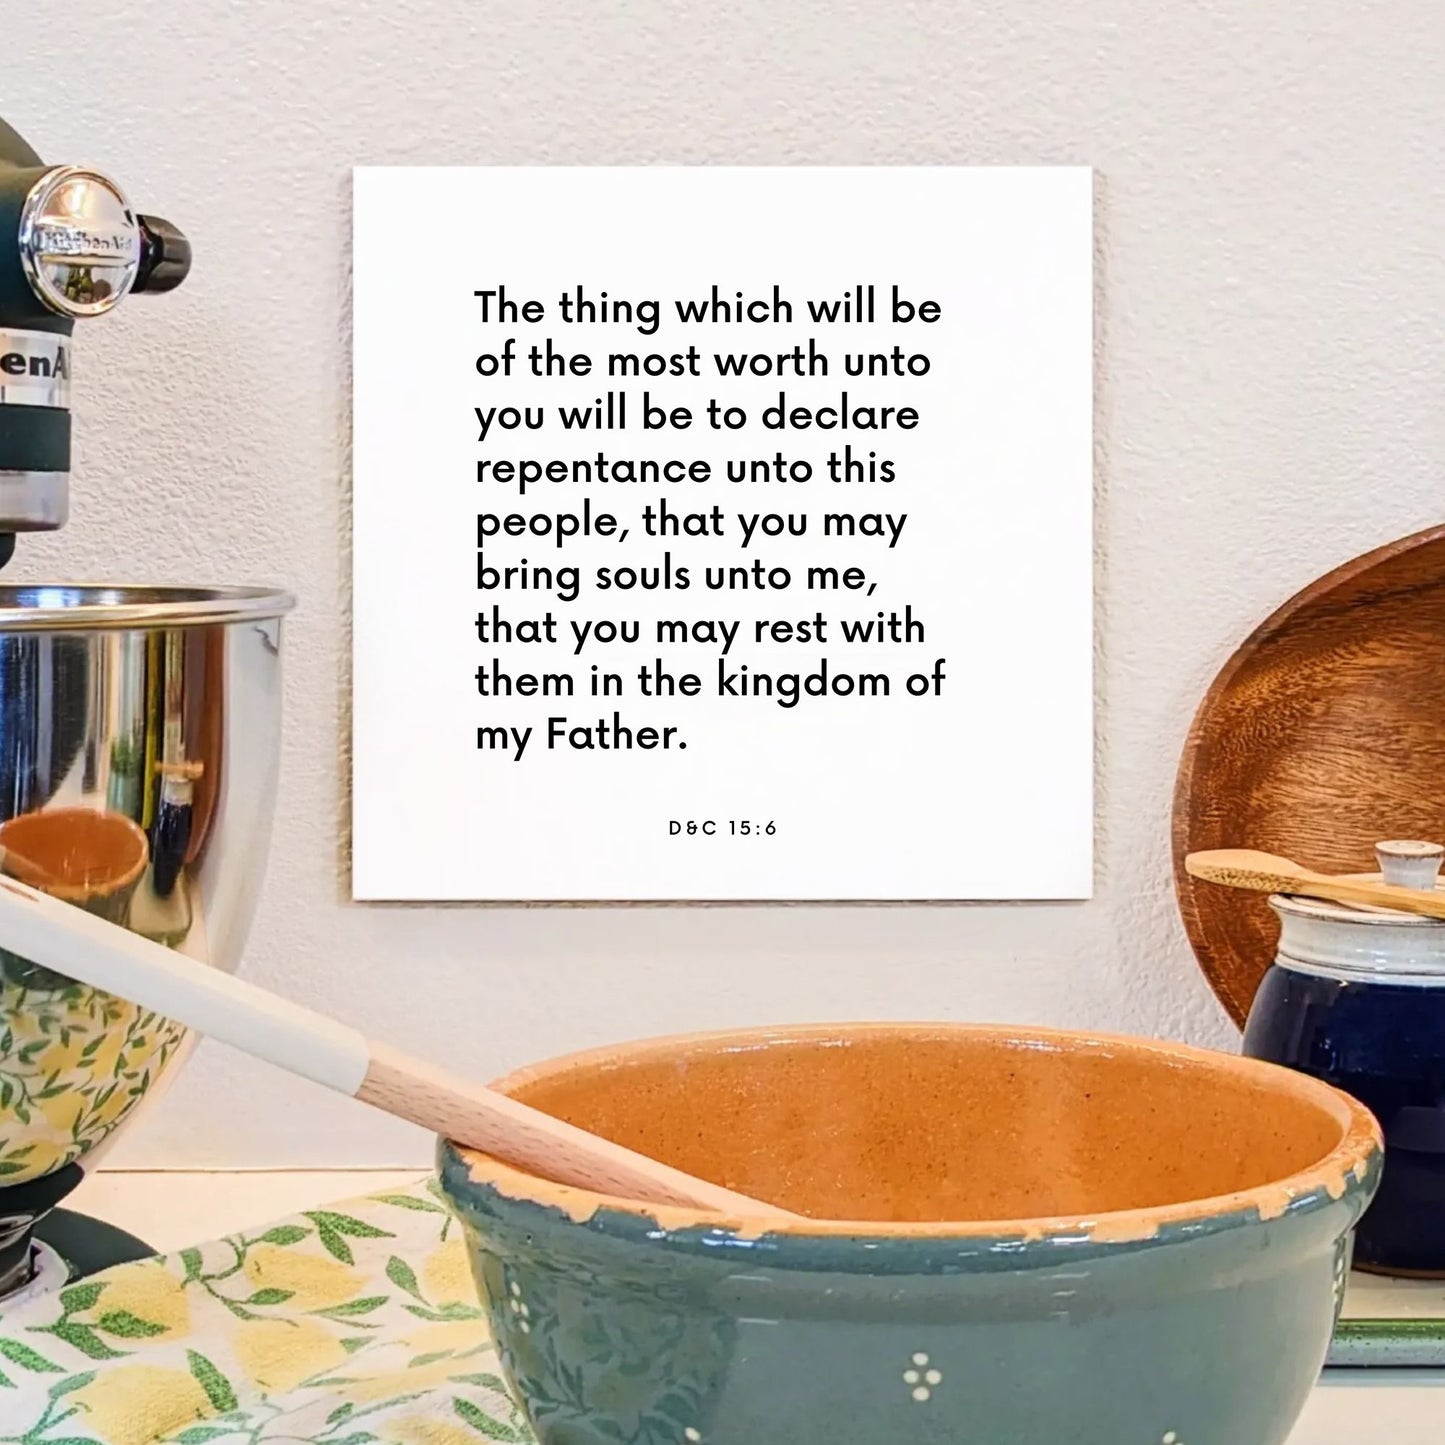 Kitchen mouting of the scripture tile for D&C 15:6 - "The thing which will be of the most worth unto you"